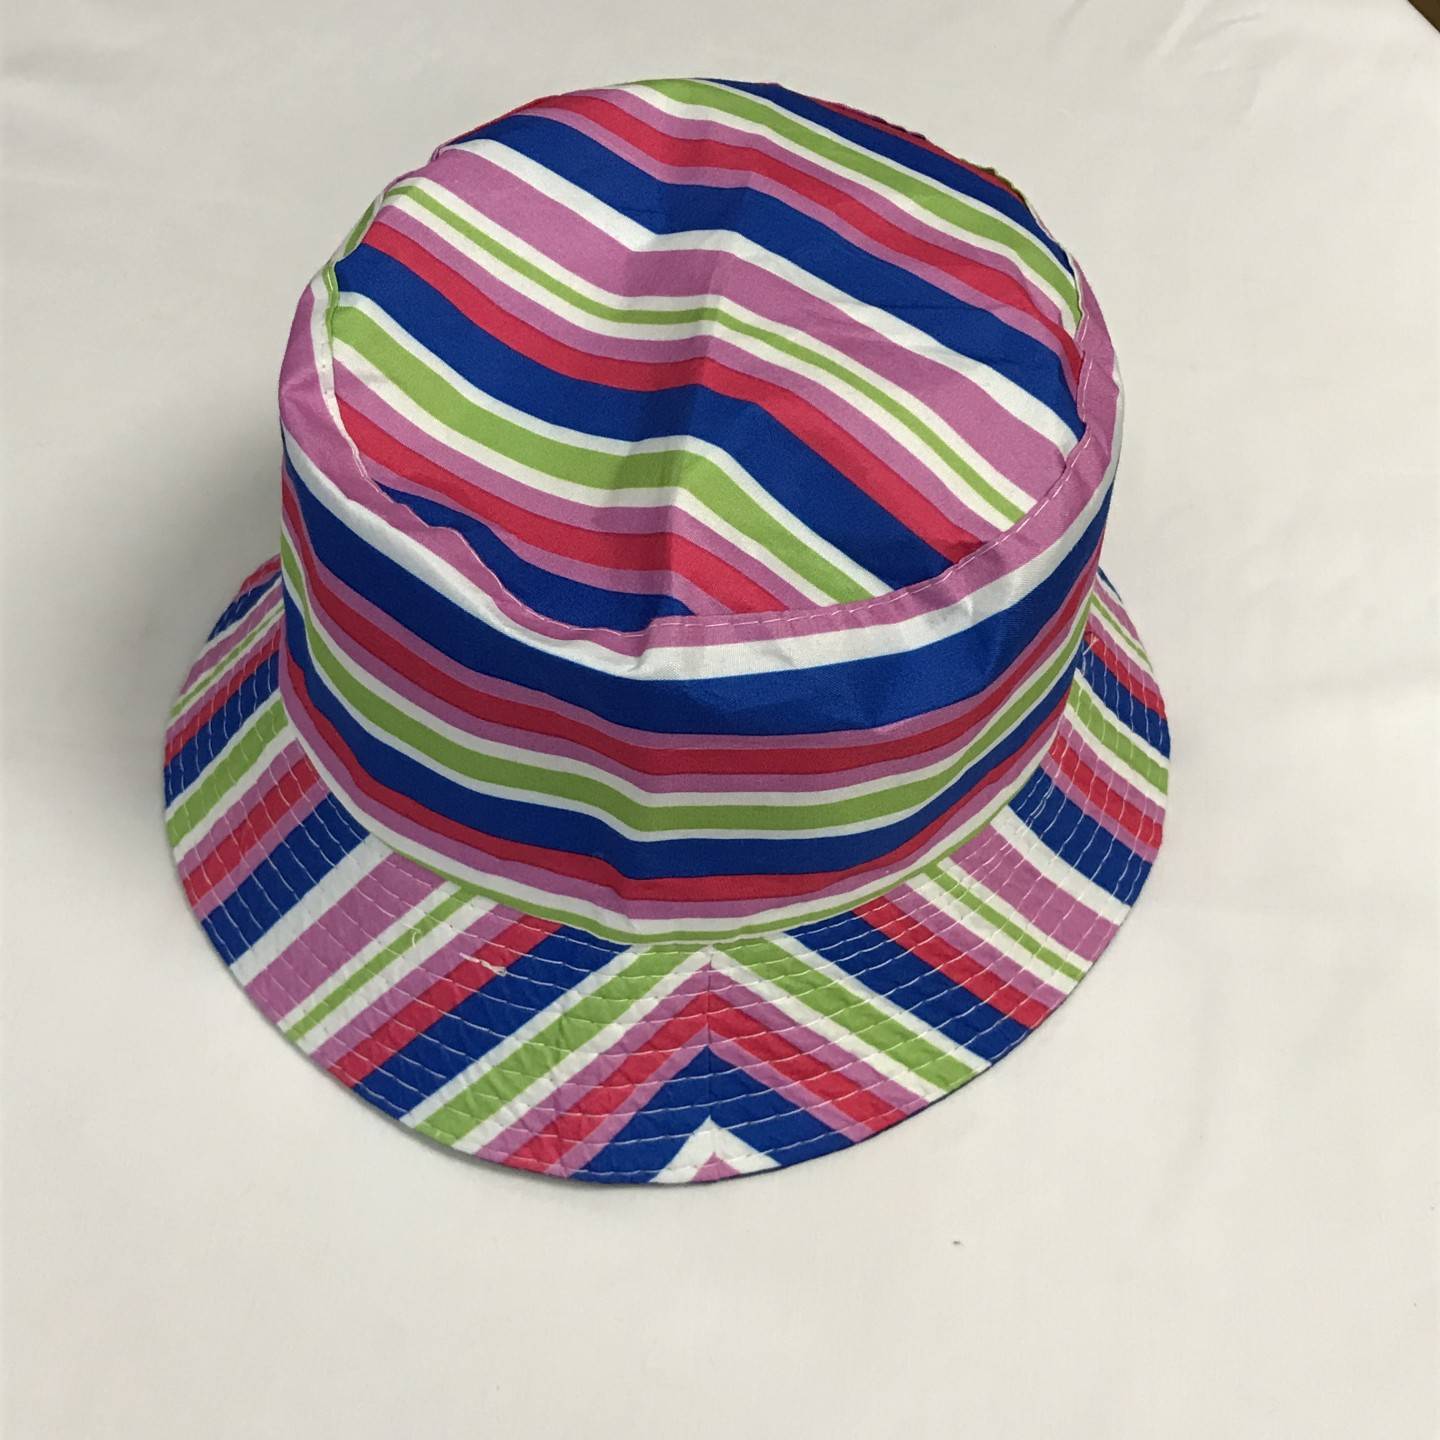 PINK AND BLUE REVERSIBLE BUCKET HAT AGES 12+